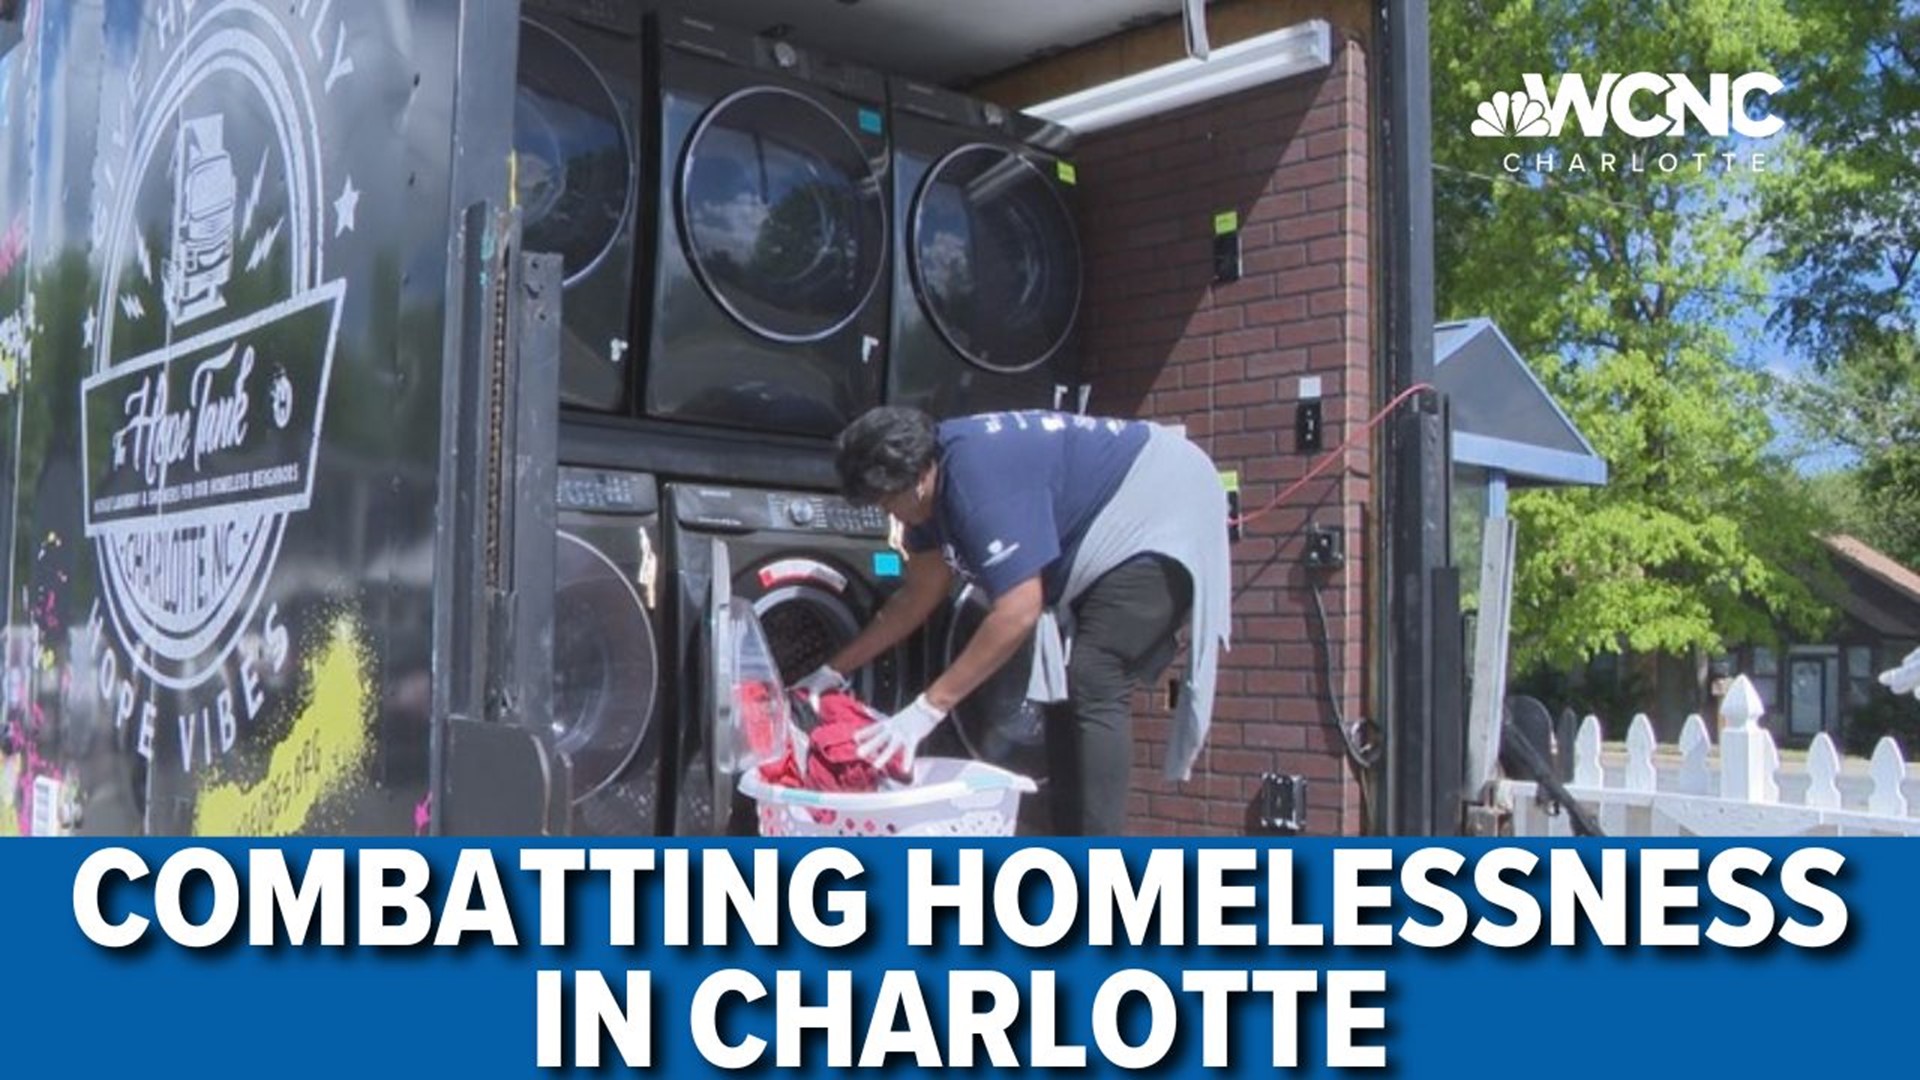 The volunteers joined resources, including use of a box truck transformed into a mobile shower and laundry station, to help those experiencing homelessness.